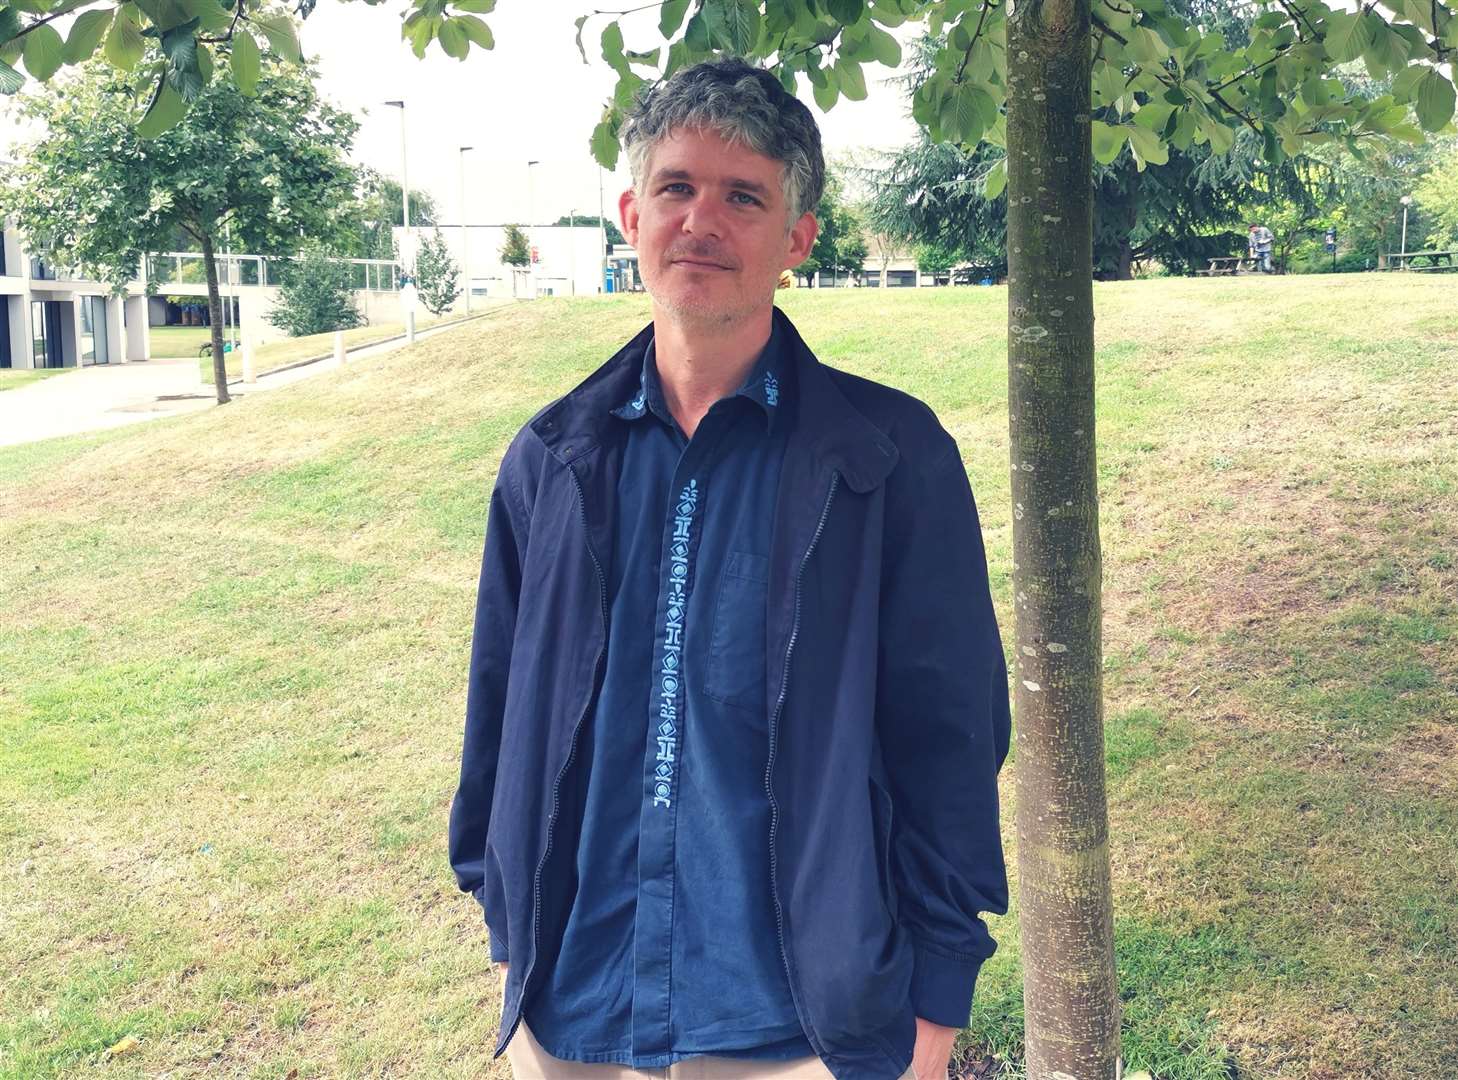 Dr Gardner has called on local councils to plant more trees to help reverse climate change pollution